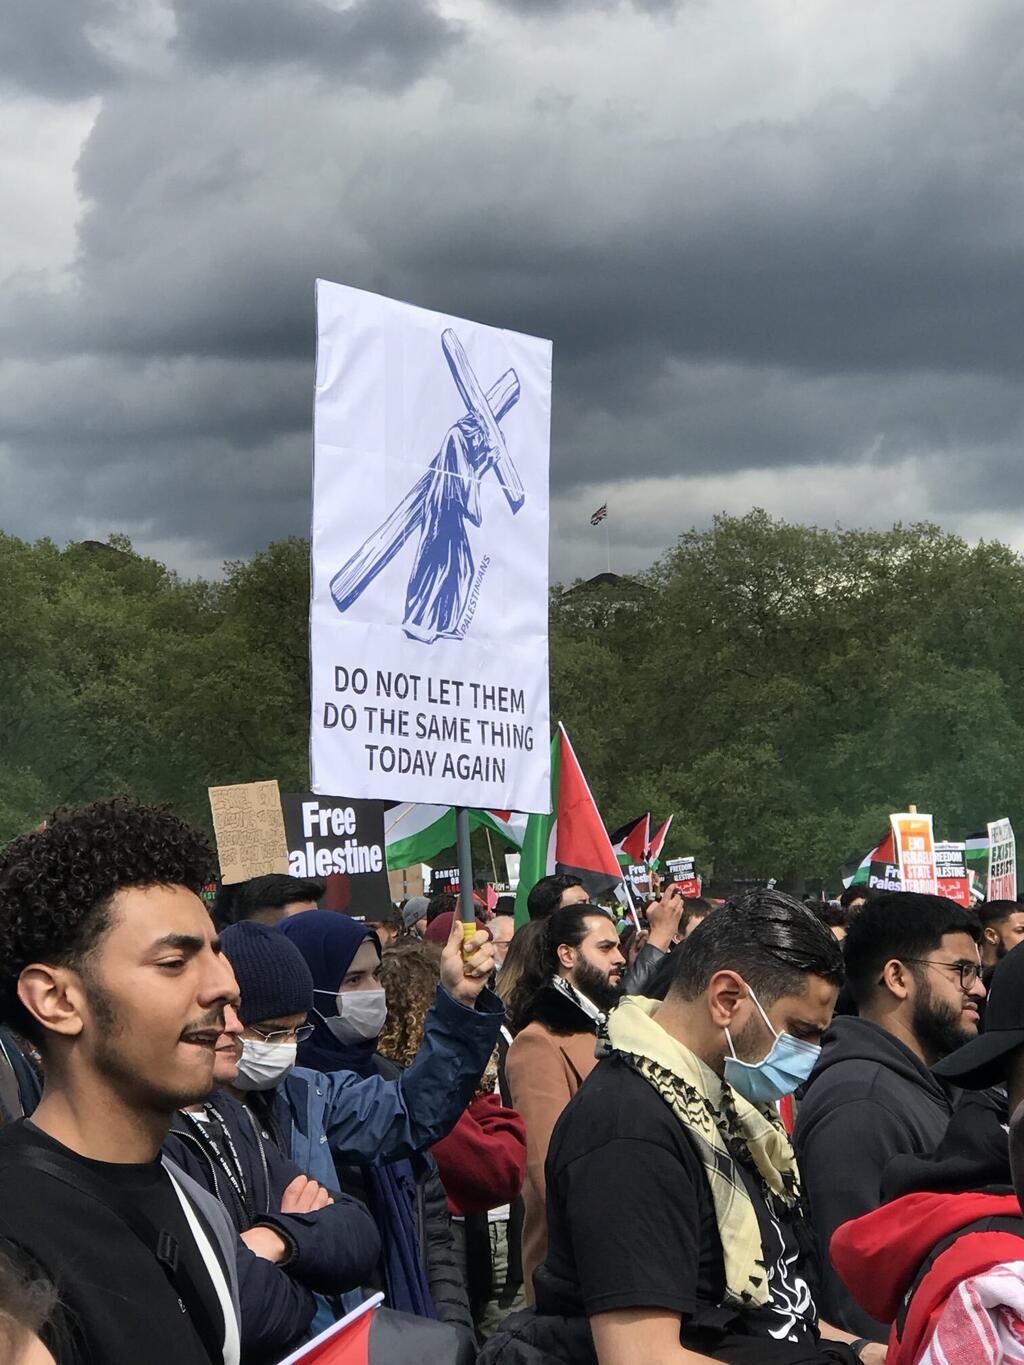 An anti-Semitic banner at a pro-Palestinian demonstration in Hyde Park, London in May 2021 